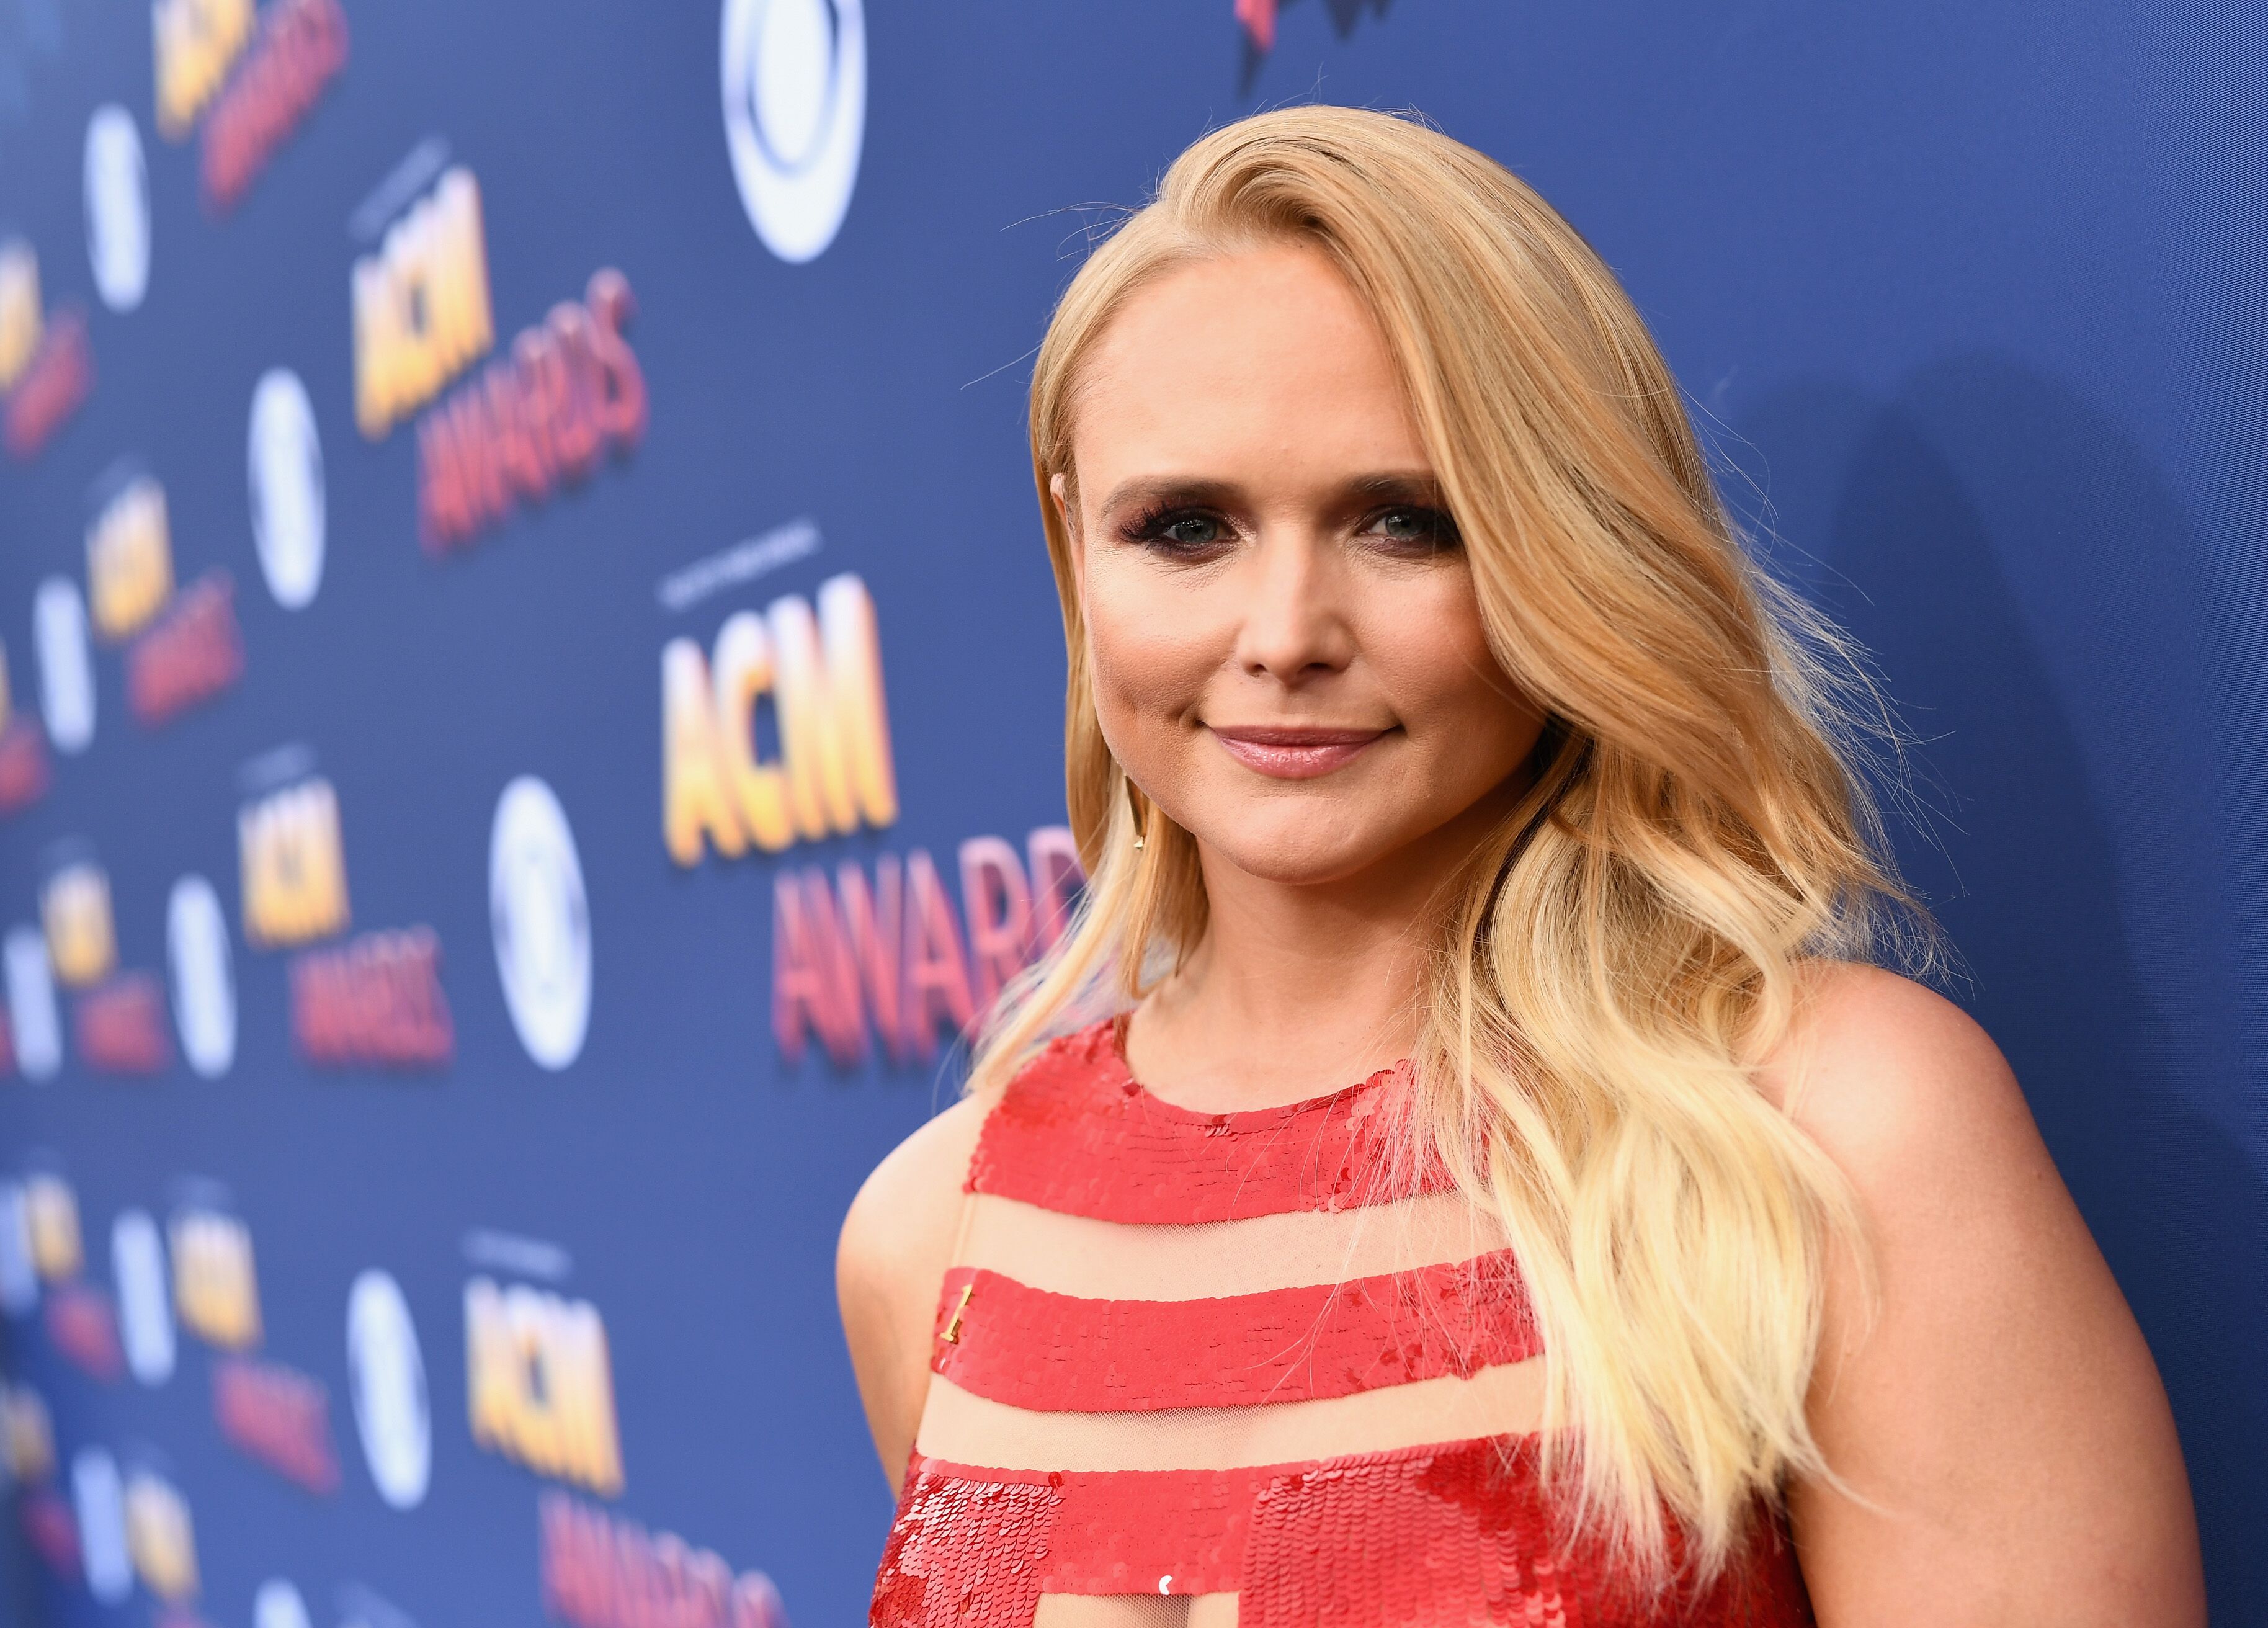 Miranda Lambert attends the 53rd Academy of Country Music Awards at MGM Grand Garden Arena on April 15, 2018 | Photo: Getty Images